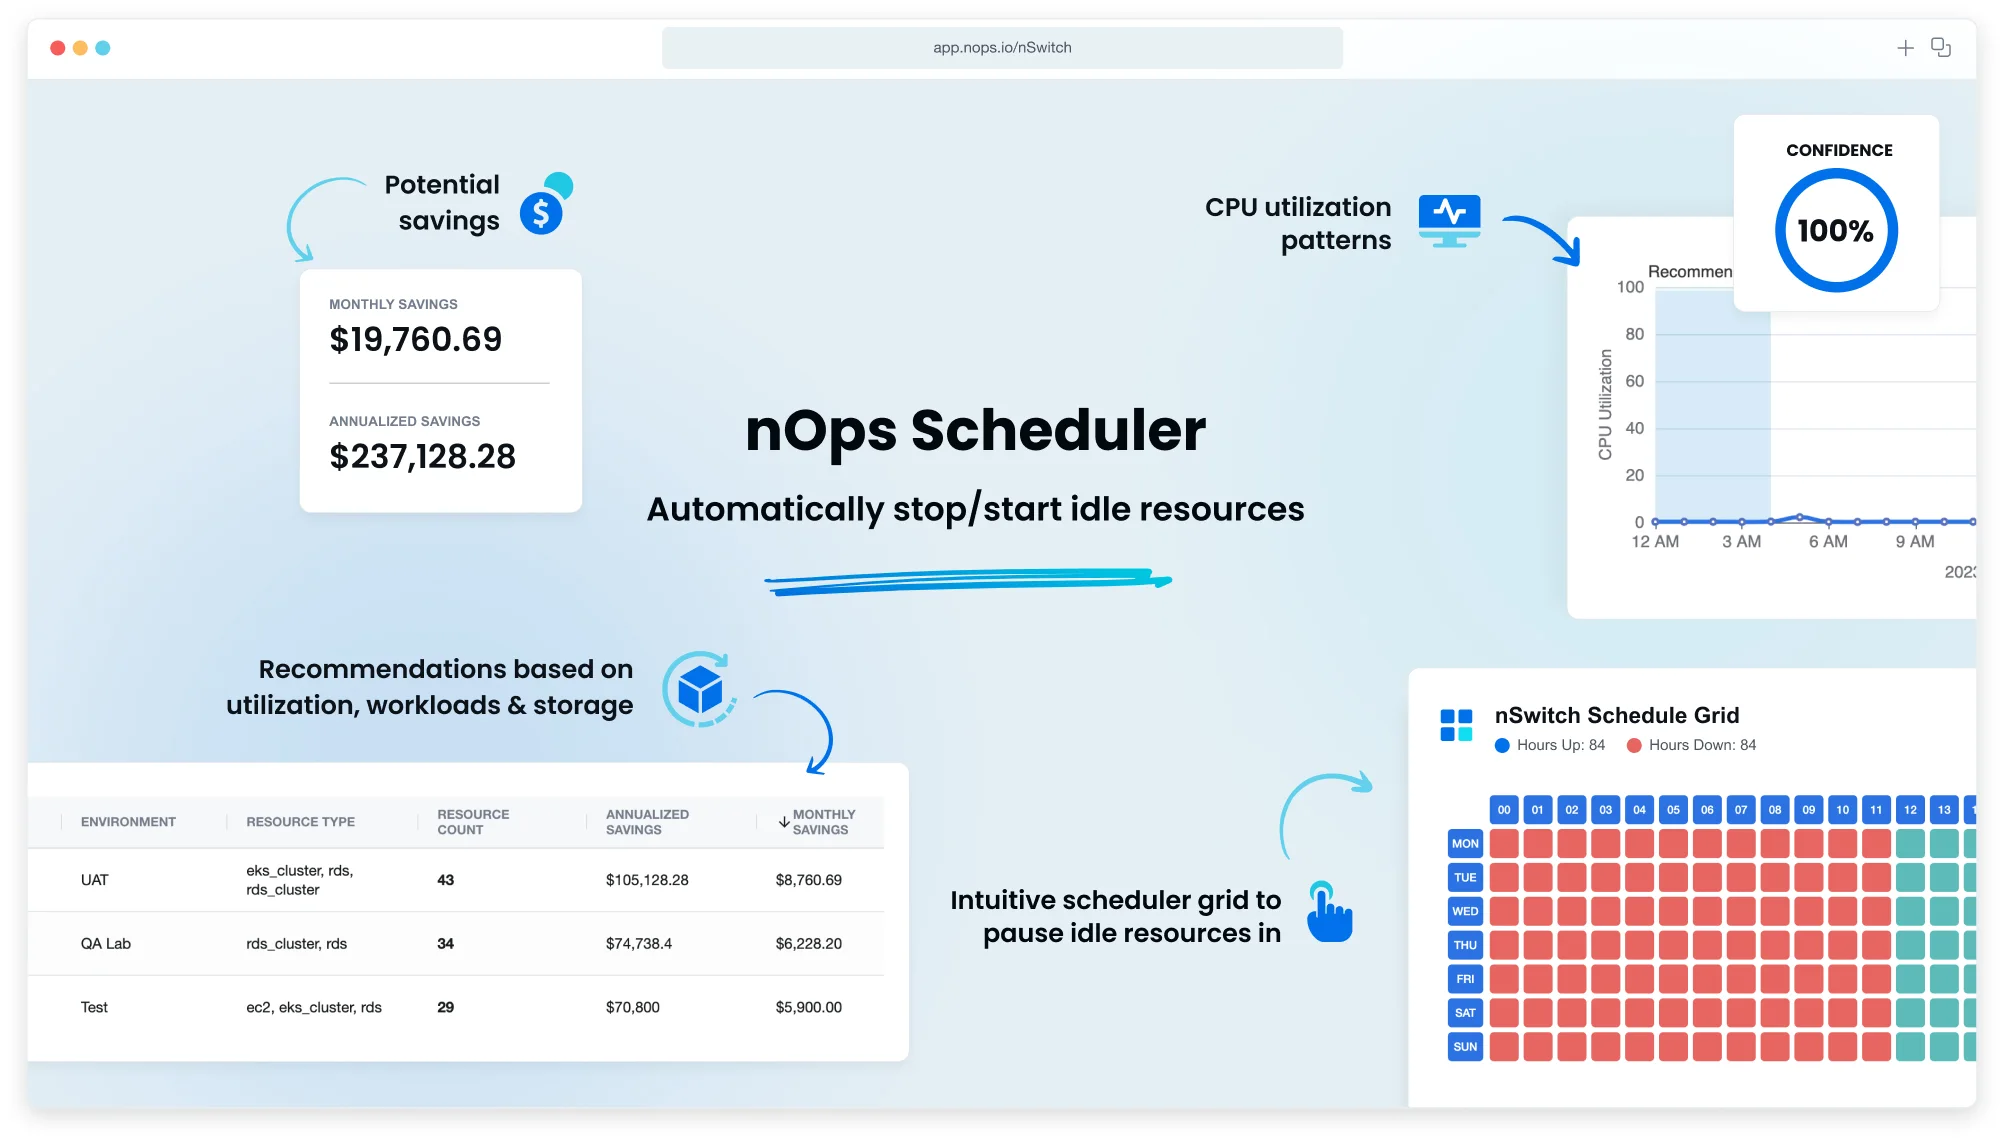 An illustration for the nOps Scheduler and its features and benefits.